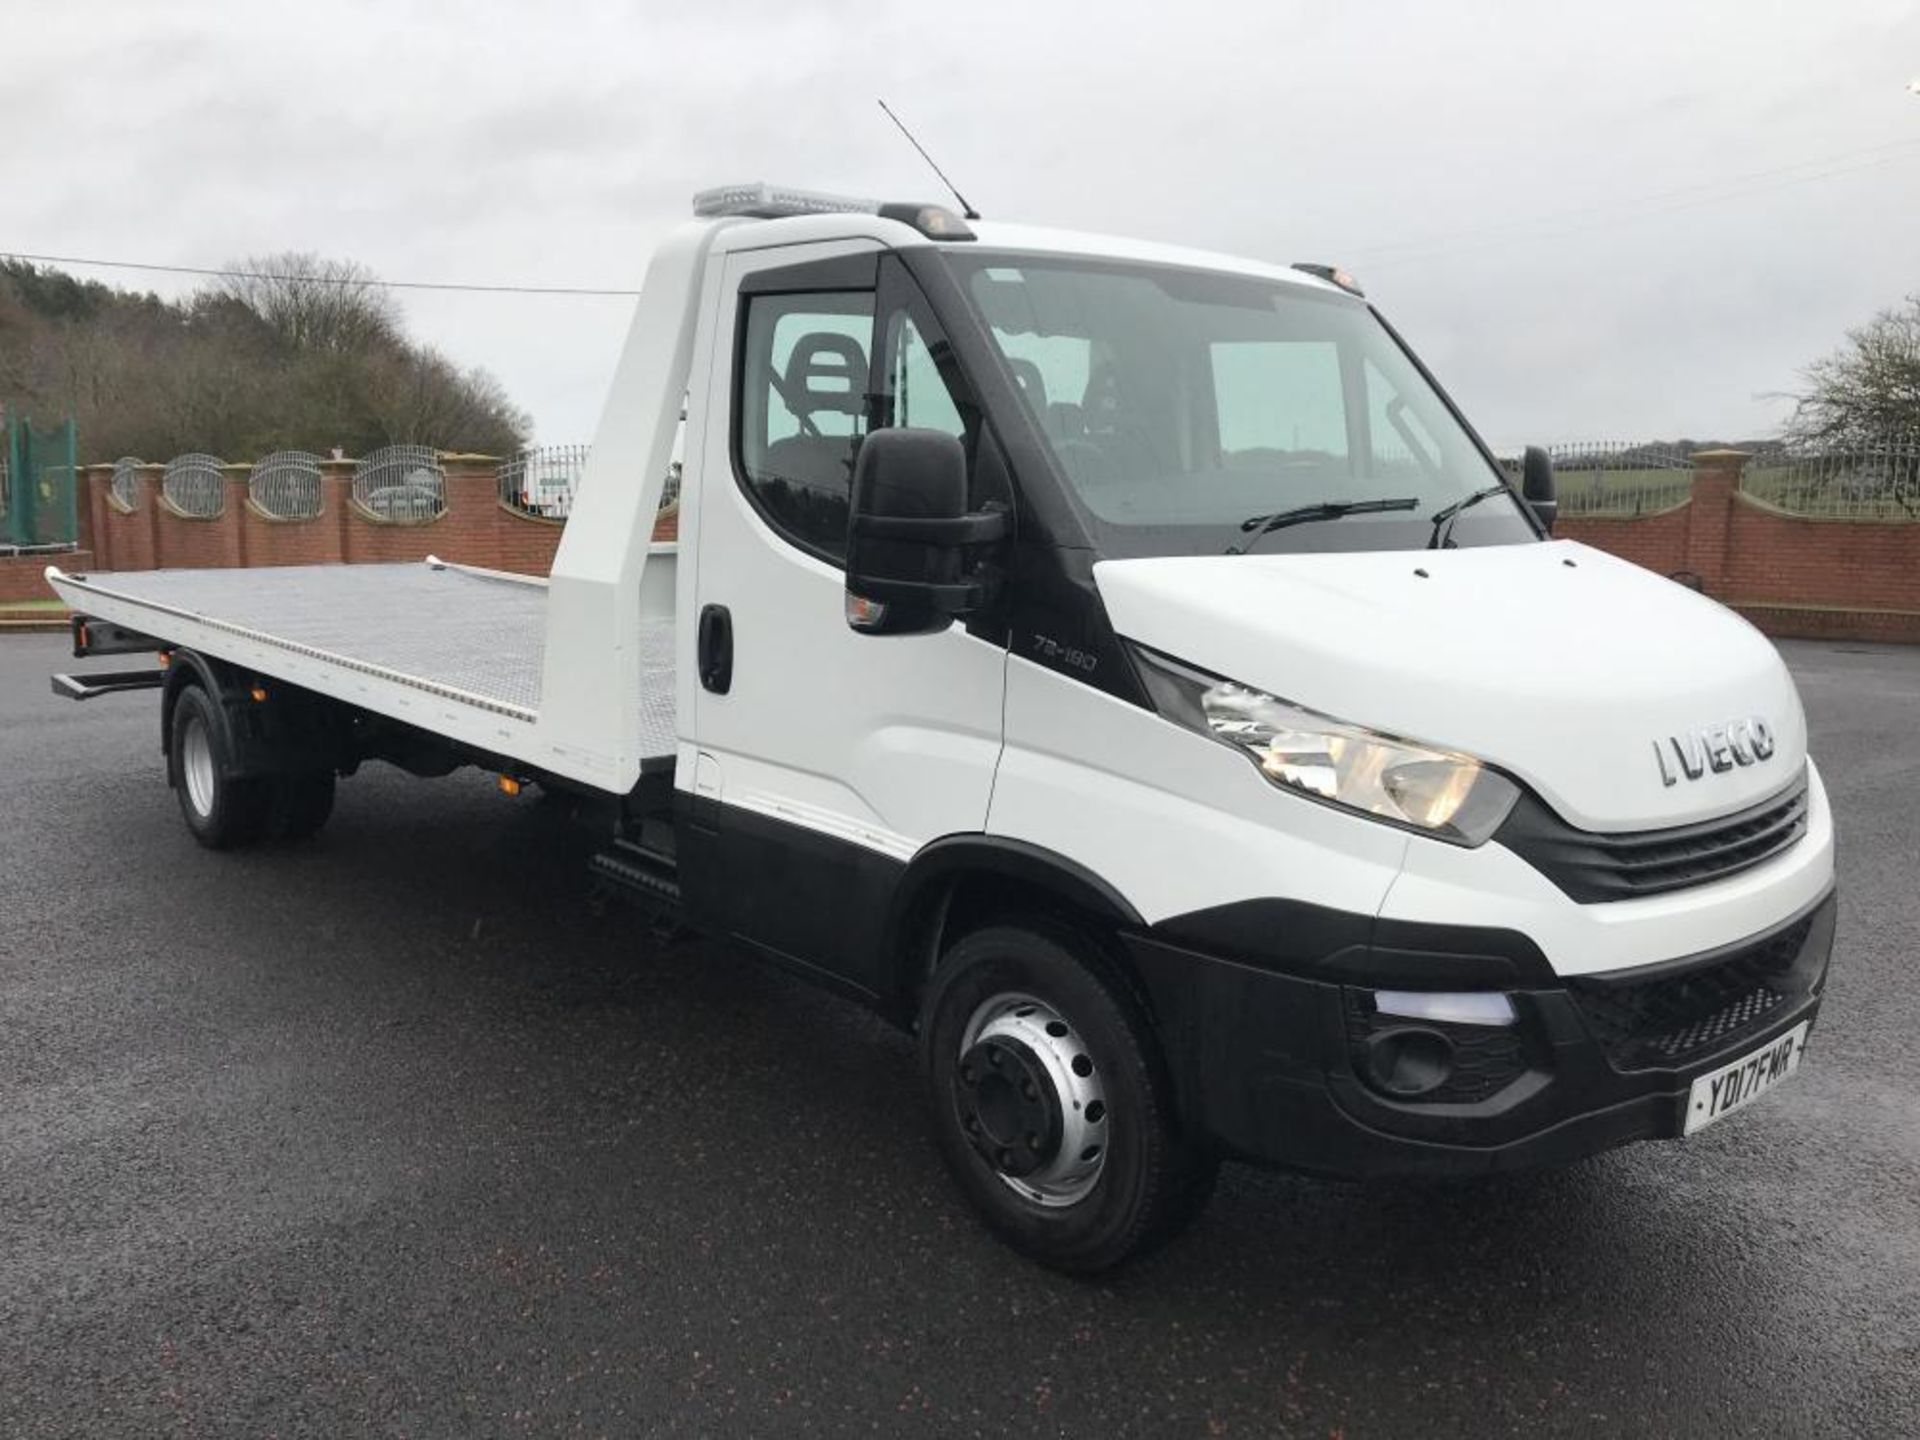 2017 IVECO DAILY 72.180 RECOVERY TRUCK SLIDE AND TILT EURO 6, 3.0 DIESEL ENGINE *PLUS VAT* - Image 2 of 15